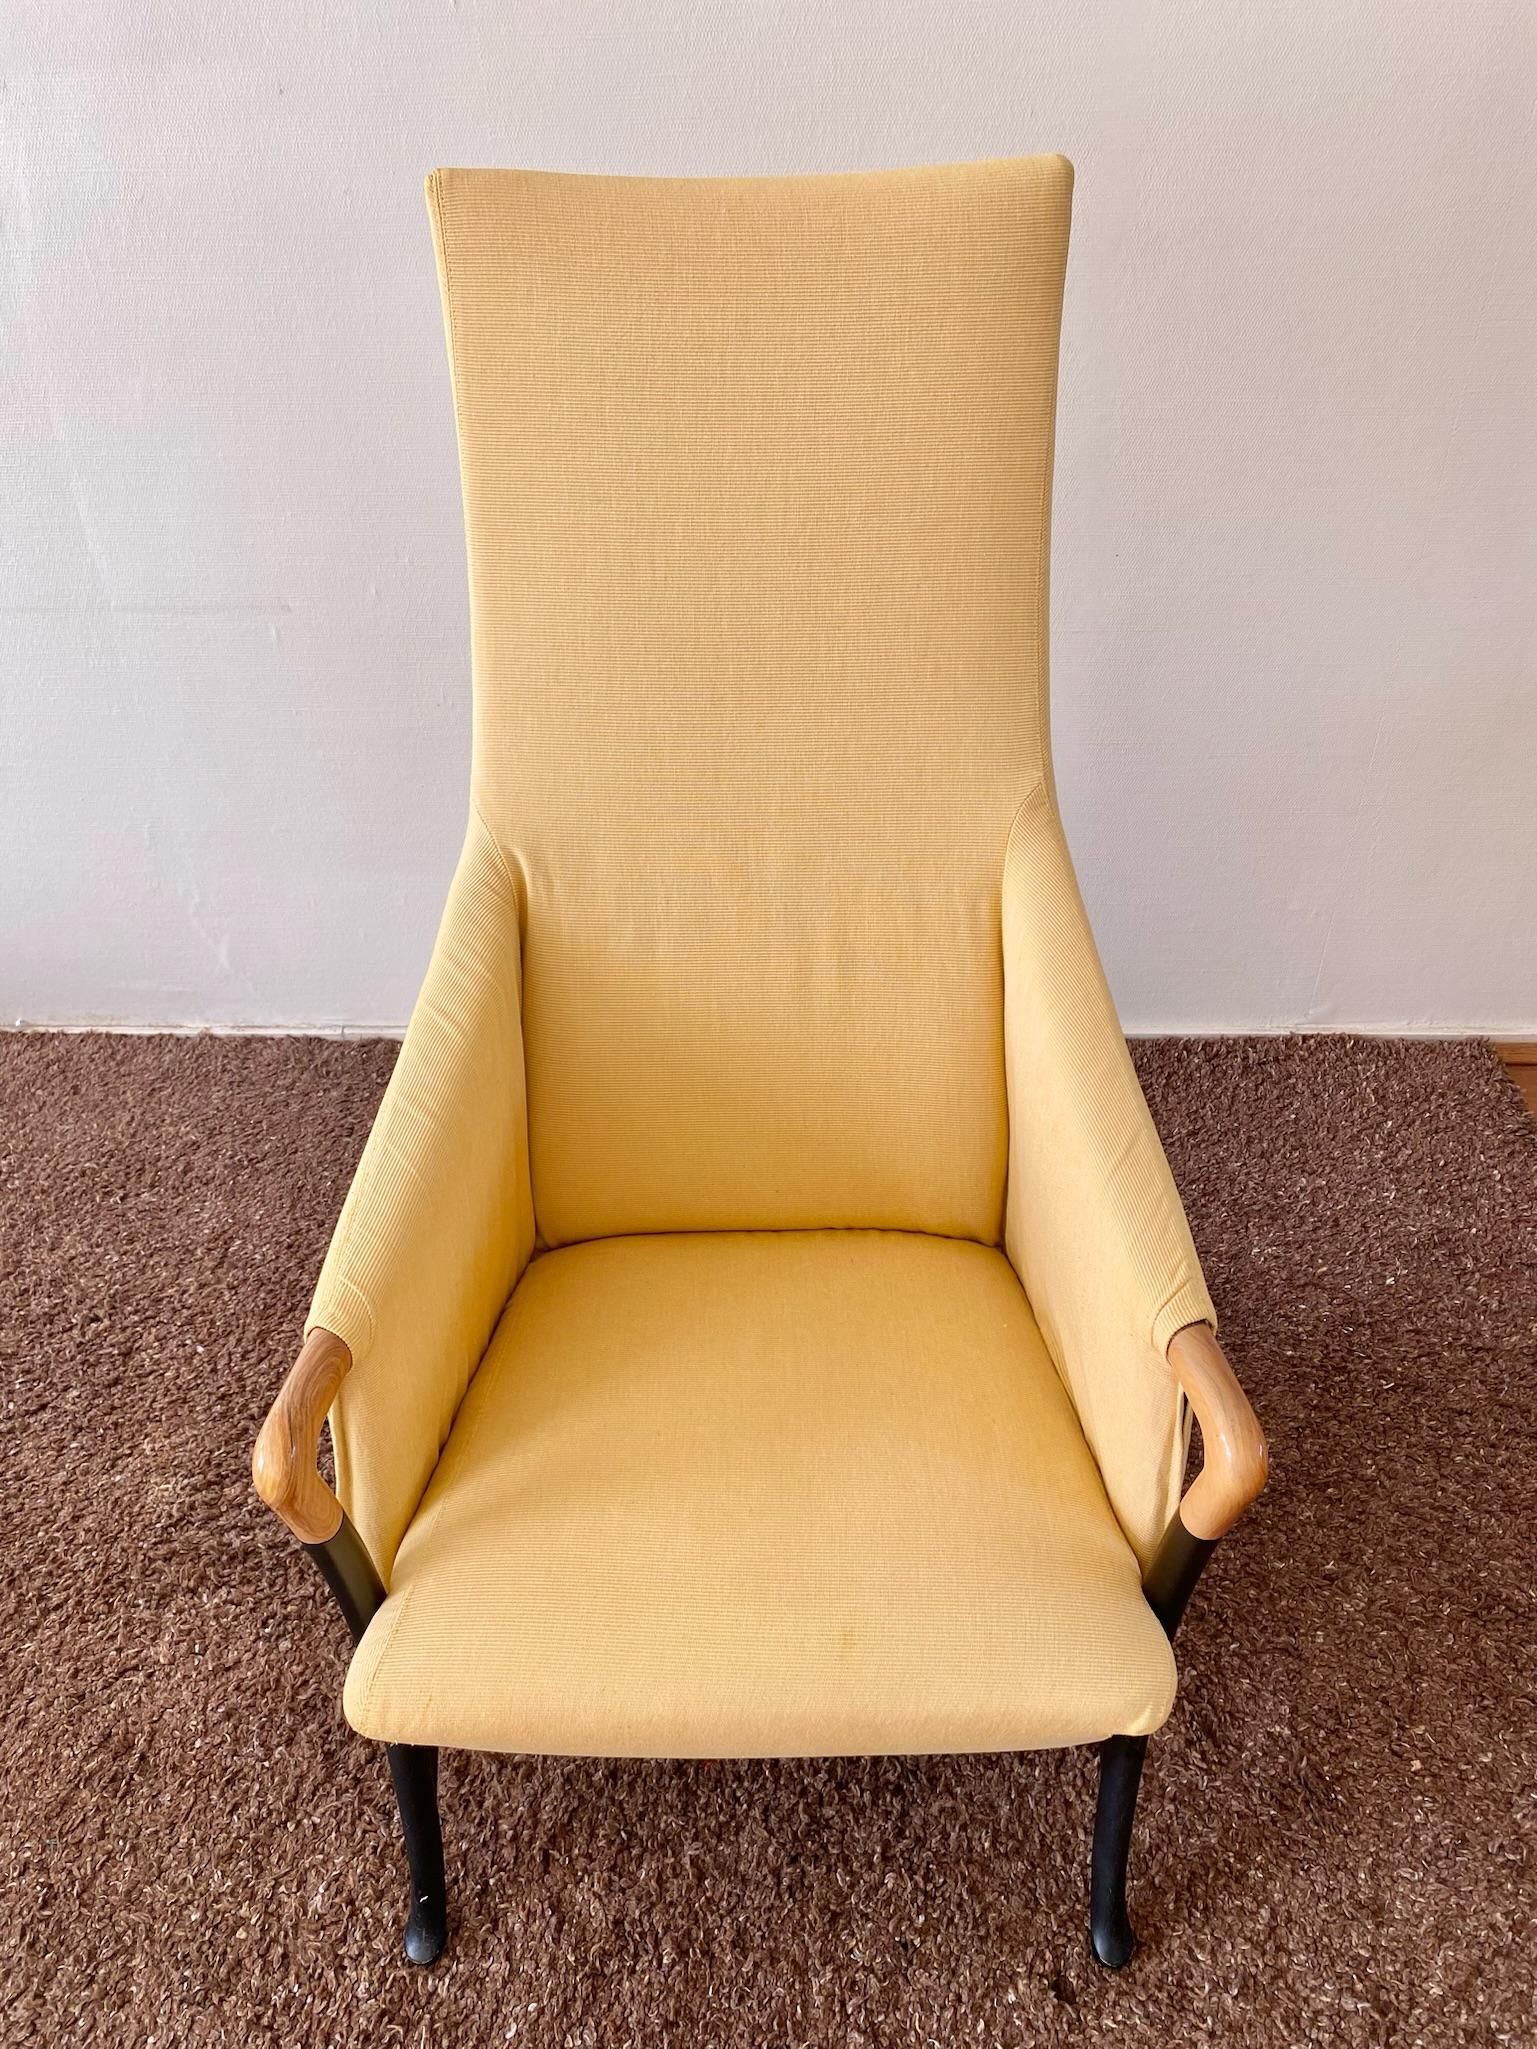 Post-Modern Giorgetti Progetti Yellow Wing chair, Highback Chair. For Sale